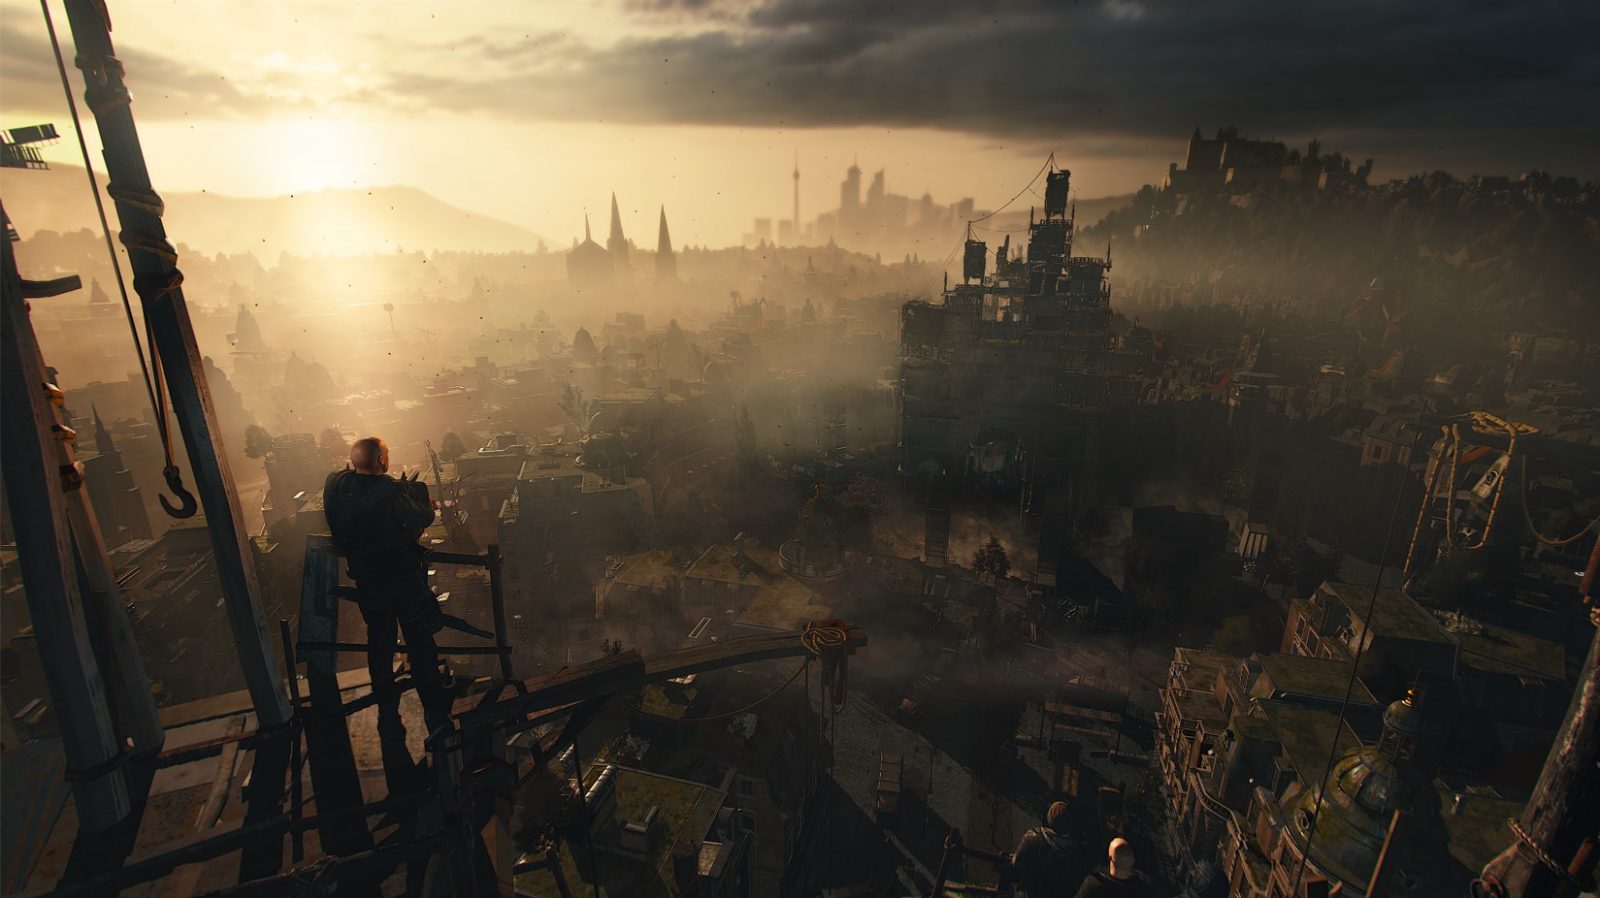 Mini-review: No, I don't want to play Dying Light 2 for 500 hours